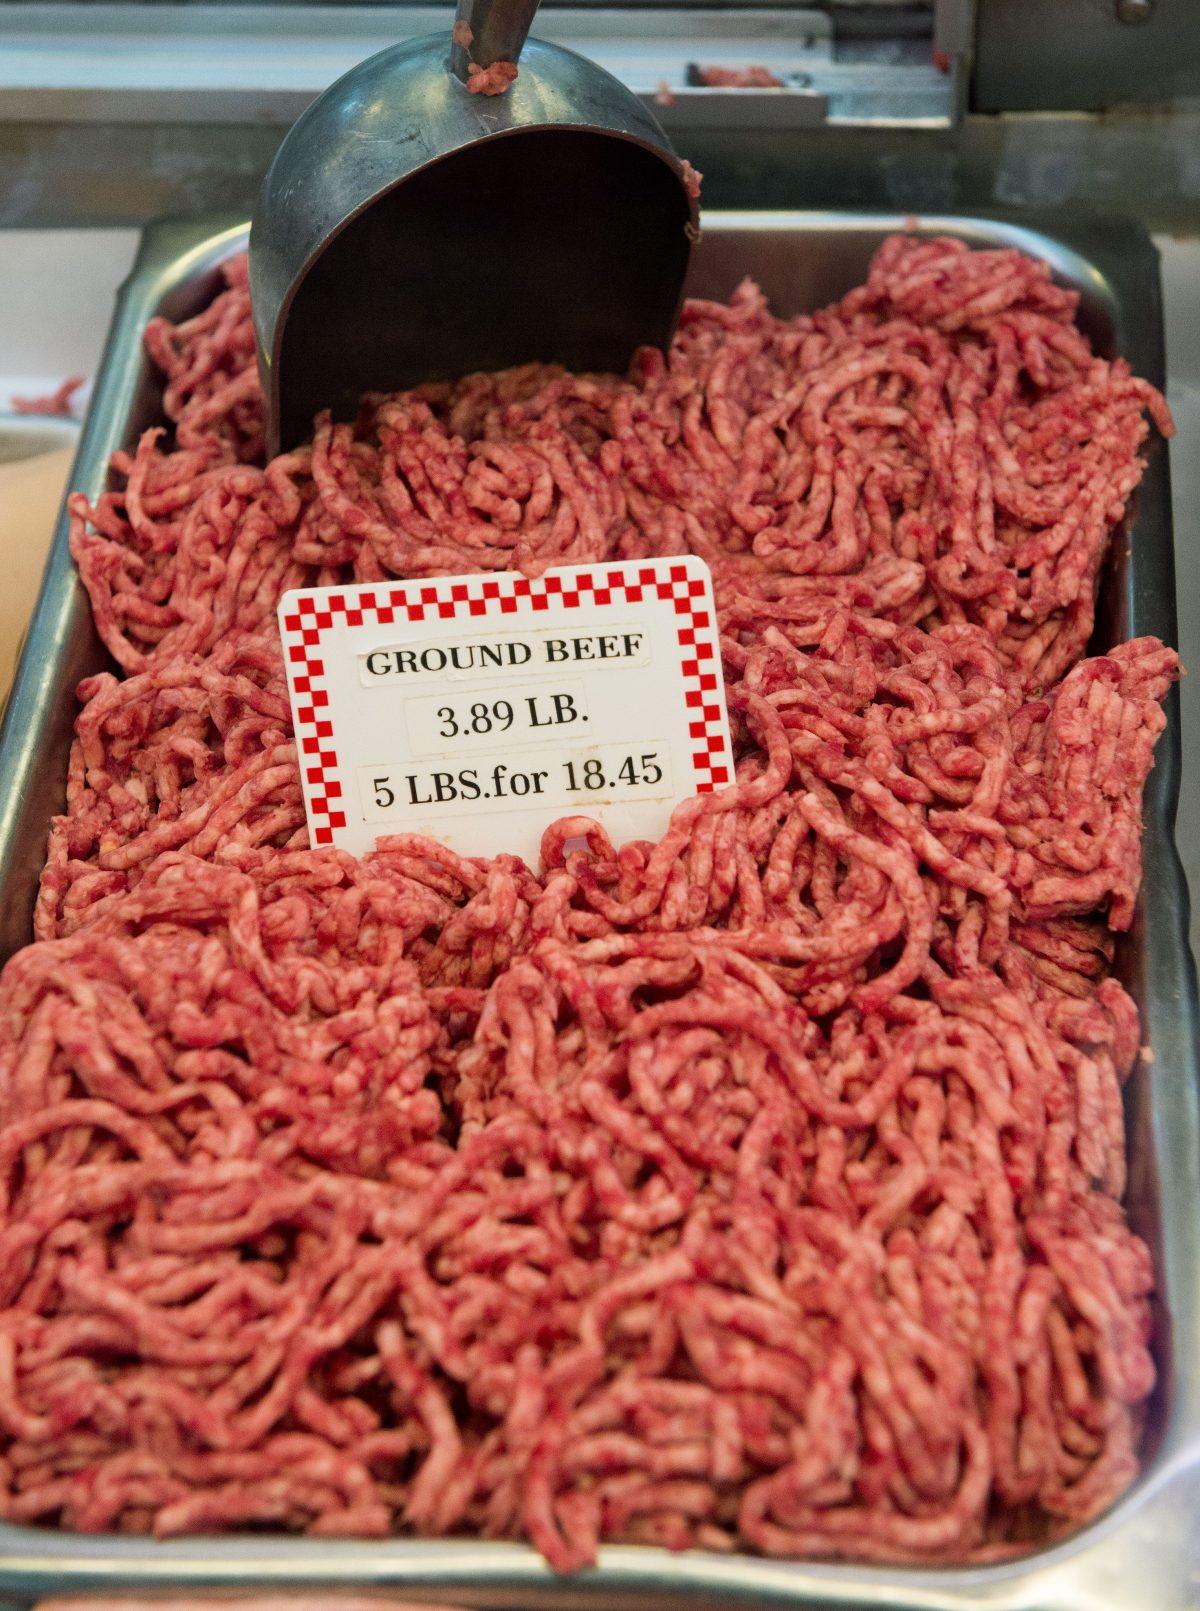 Ground Beef is for sale at Eastern Market in Washington on Dec. 18, 2014. (AFP/Getty Images)